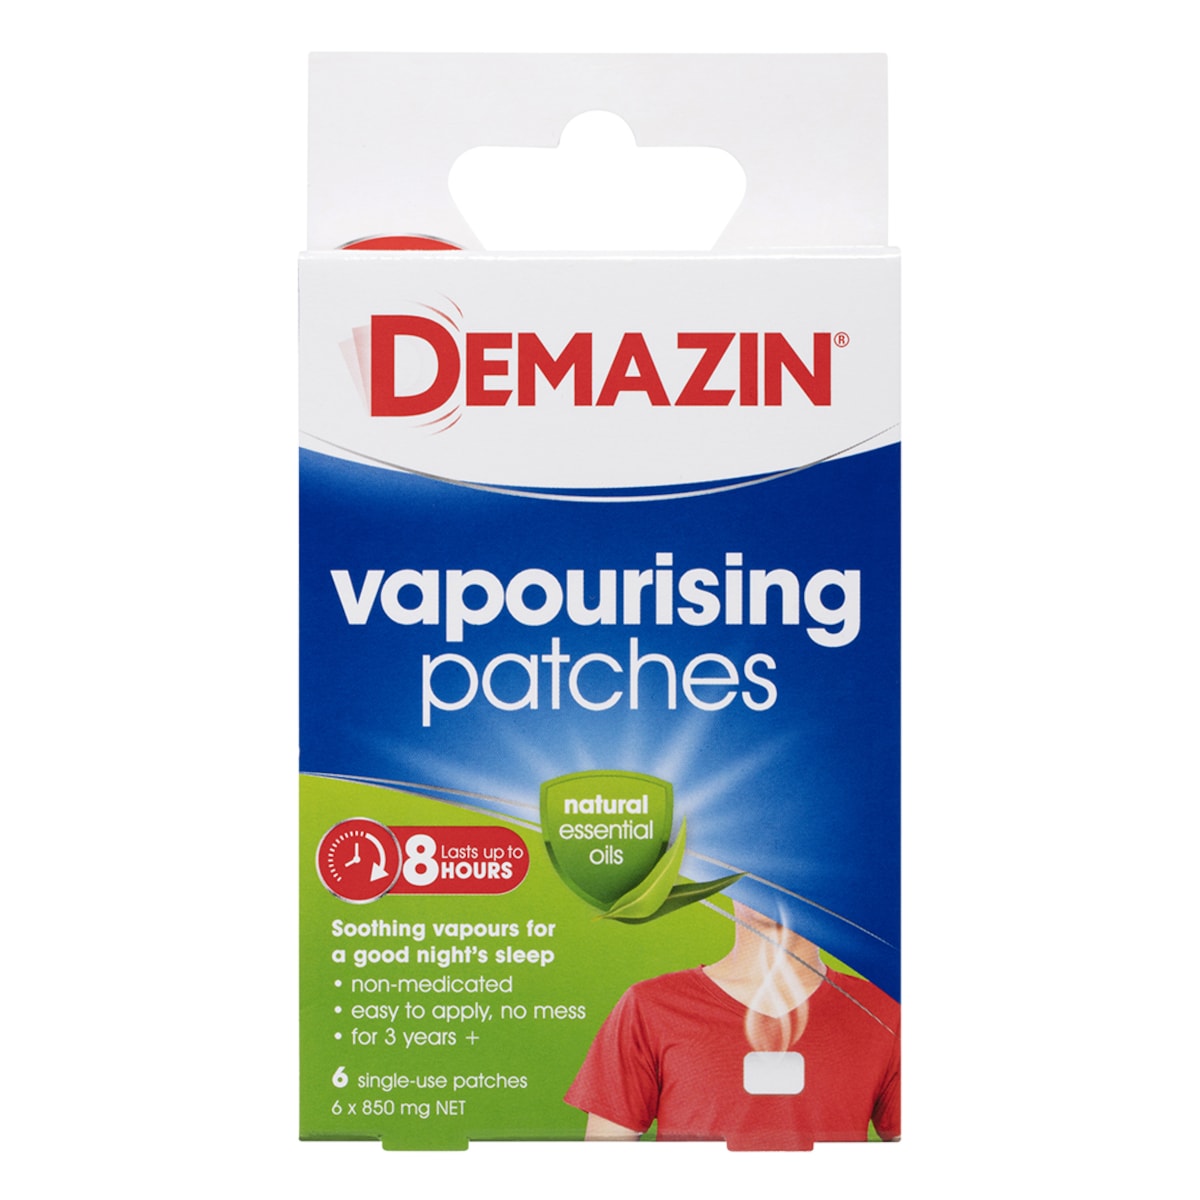 Demazin Vapourising Patches with Natural Essential Oils 6 Pack